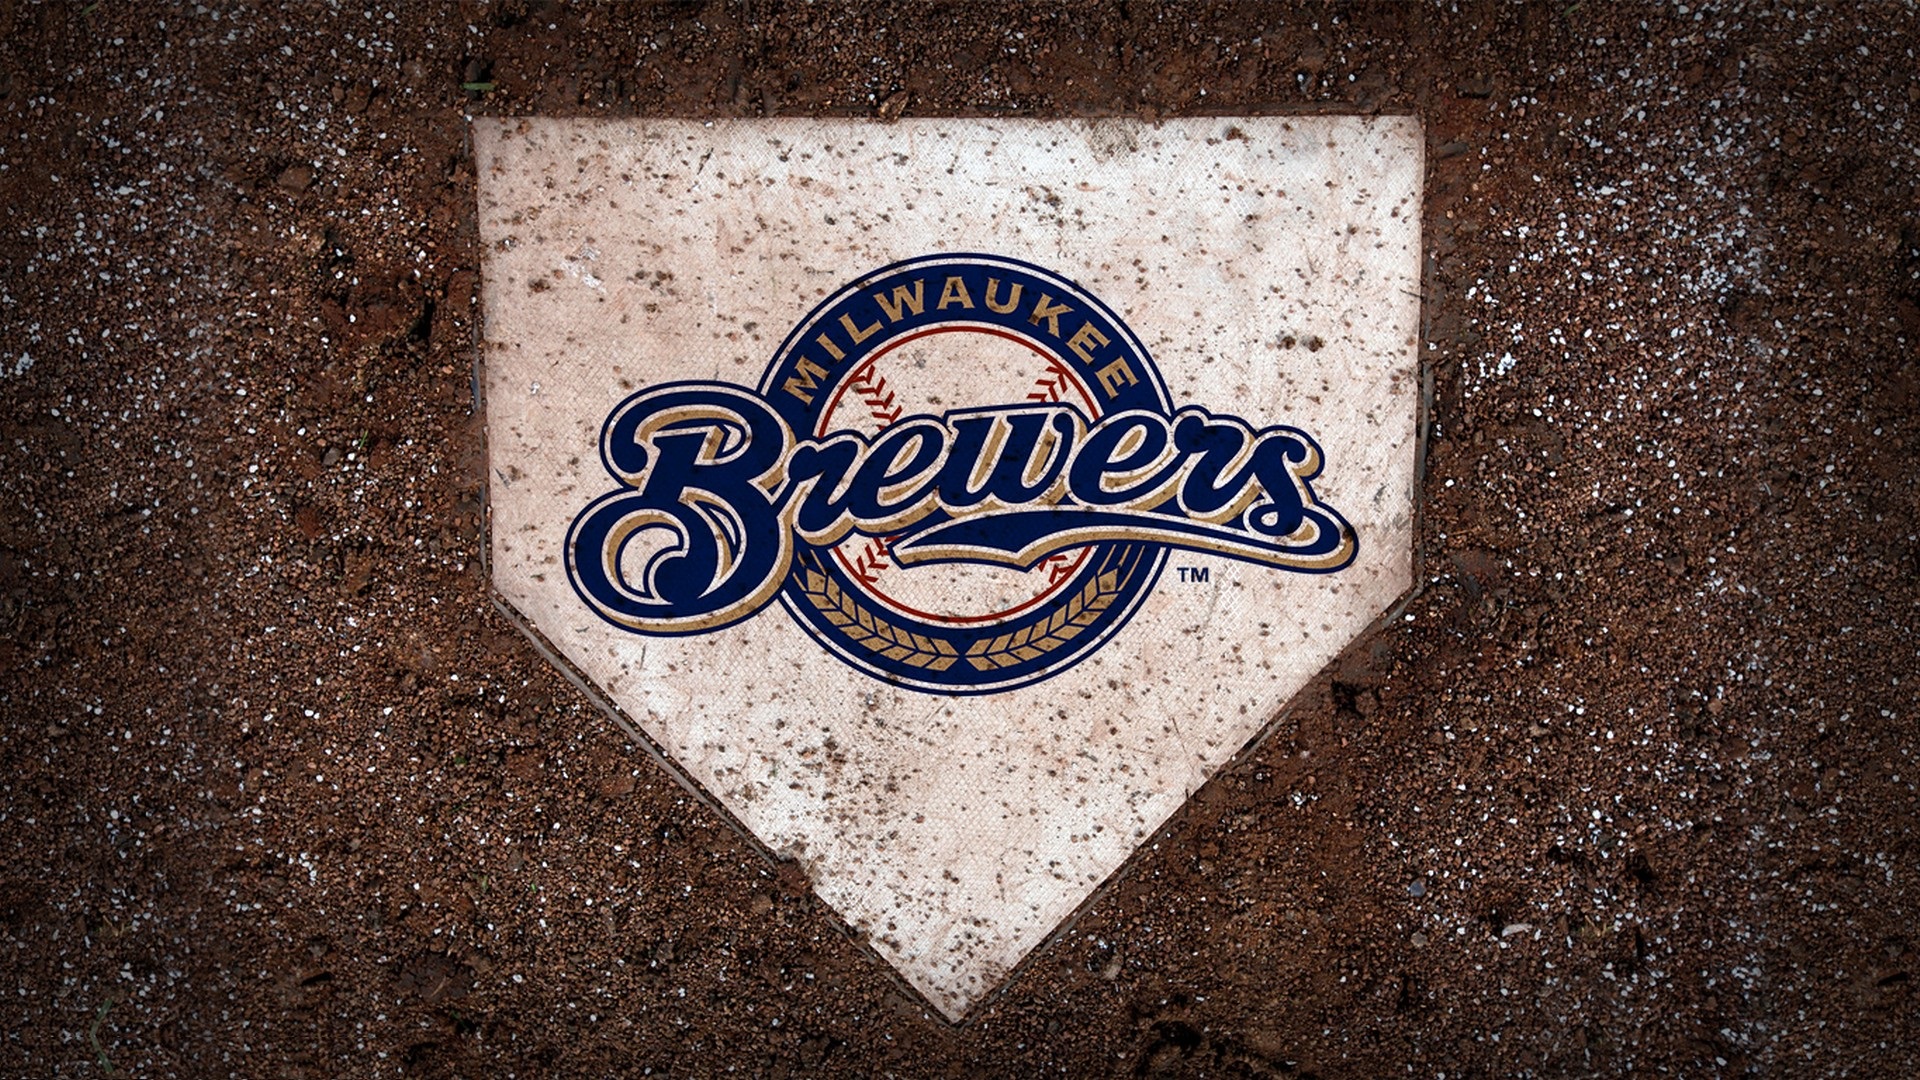 Milwaukee Brewers For Desktop Wallpaper with high-resolution 1920x1080 pixel. You can use this wallpaper for Mac Desktop Wallpaper, Laptop Screensavers, Android Wallpapers, Tablet or iPhone Home Screen and another mobile phone device